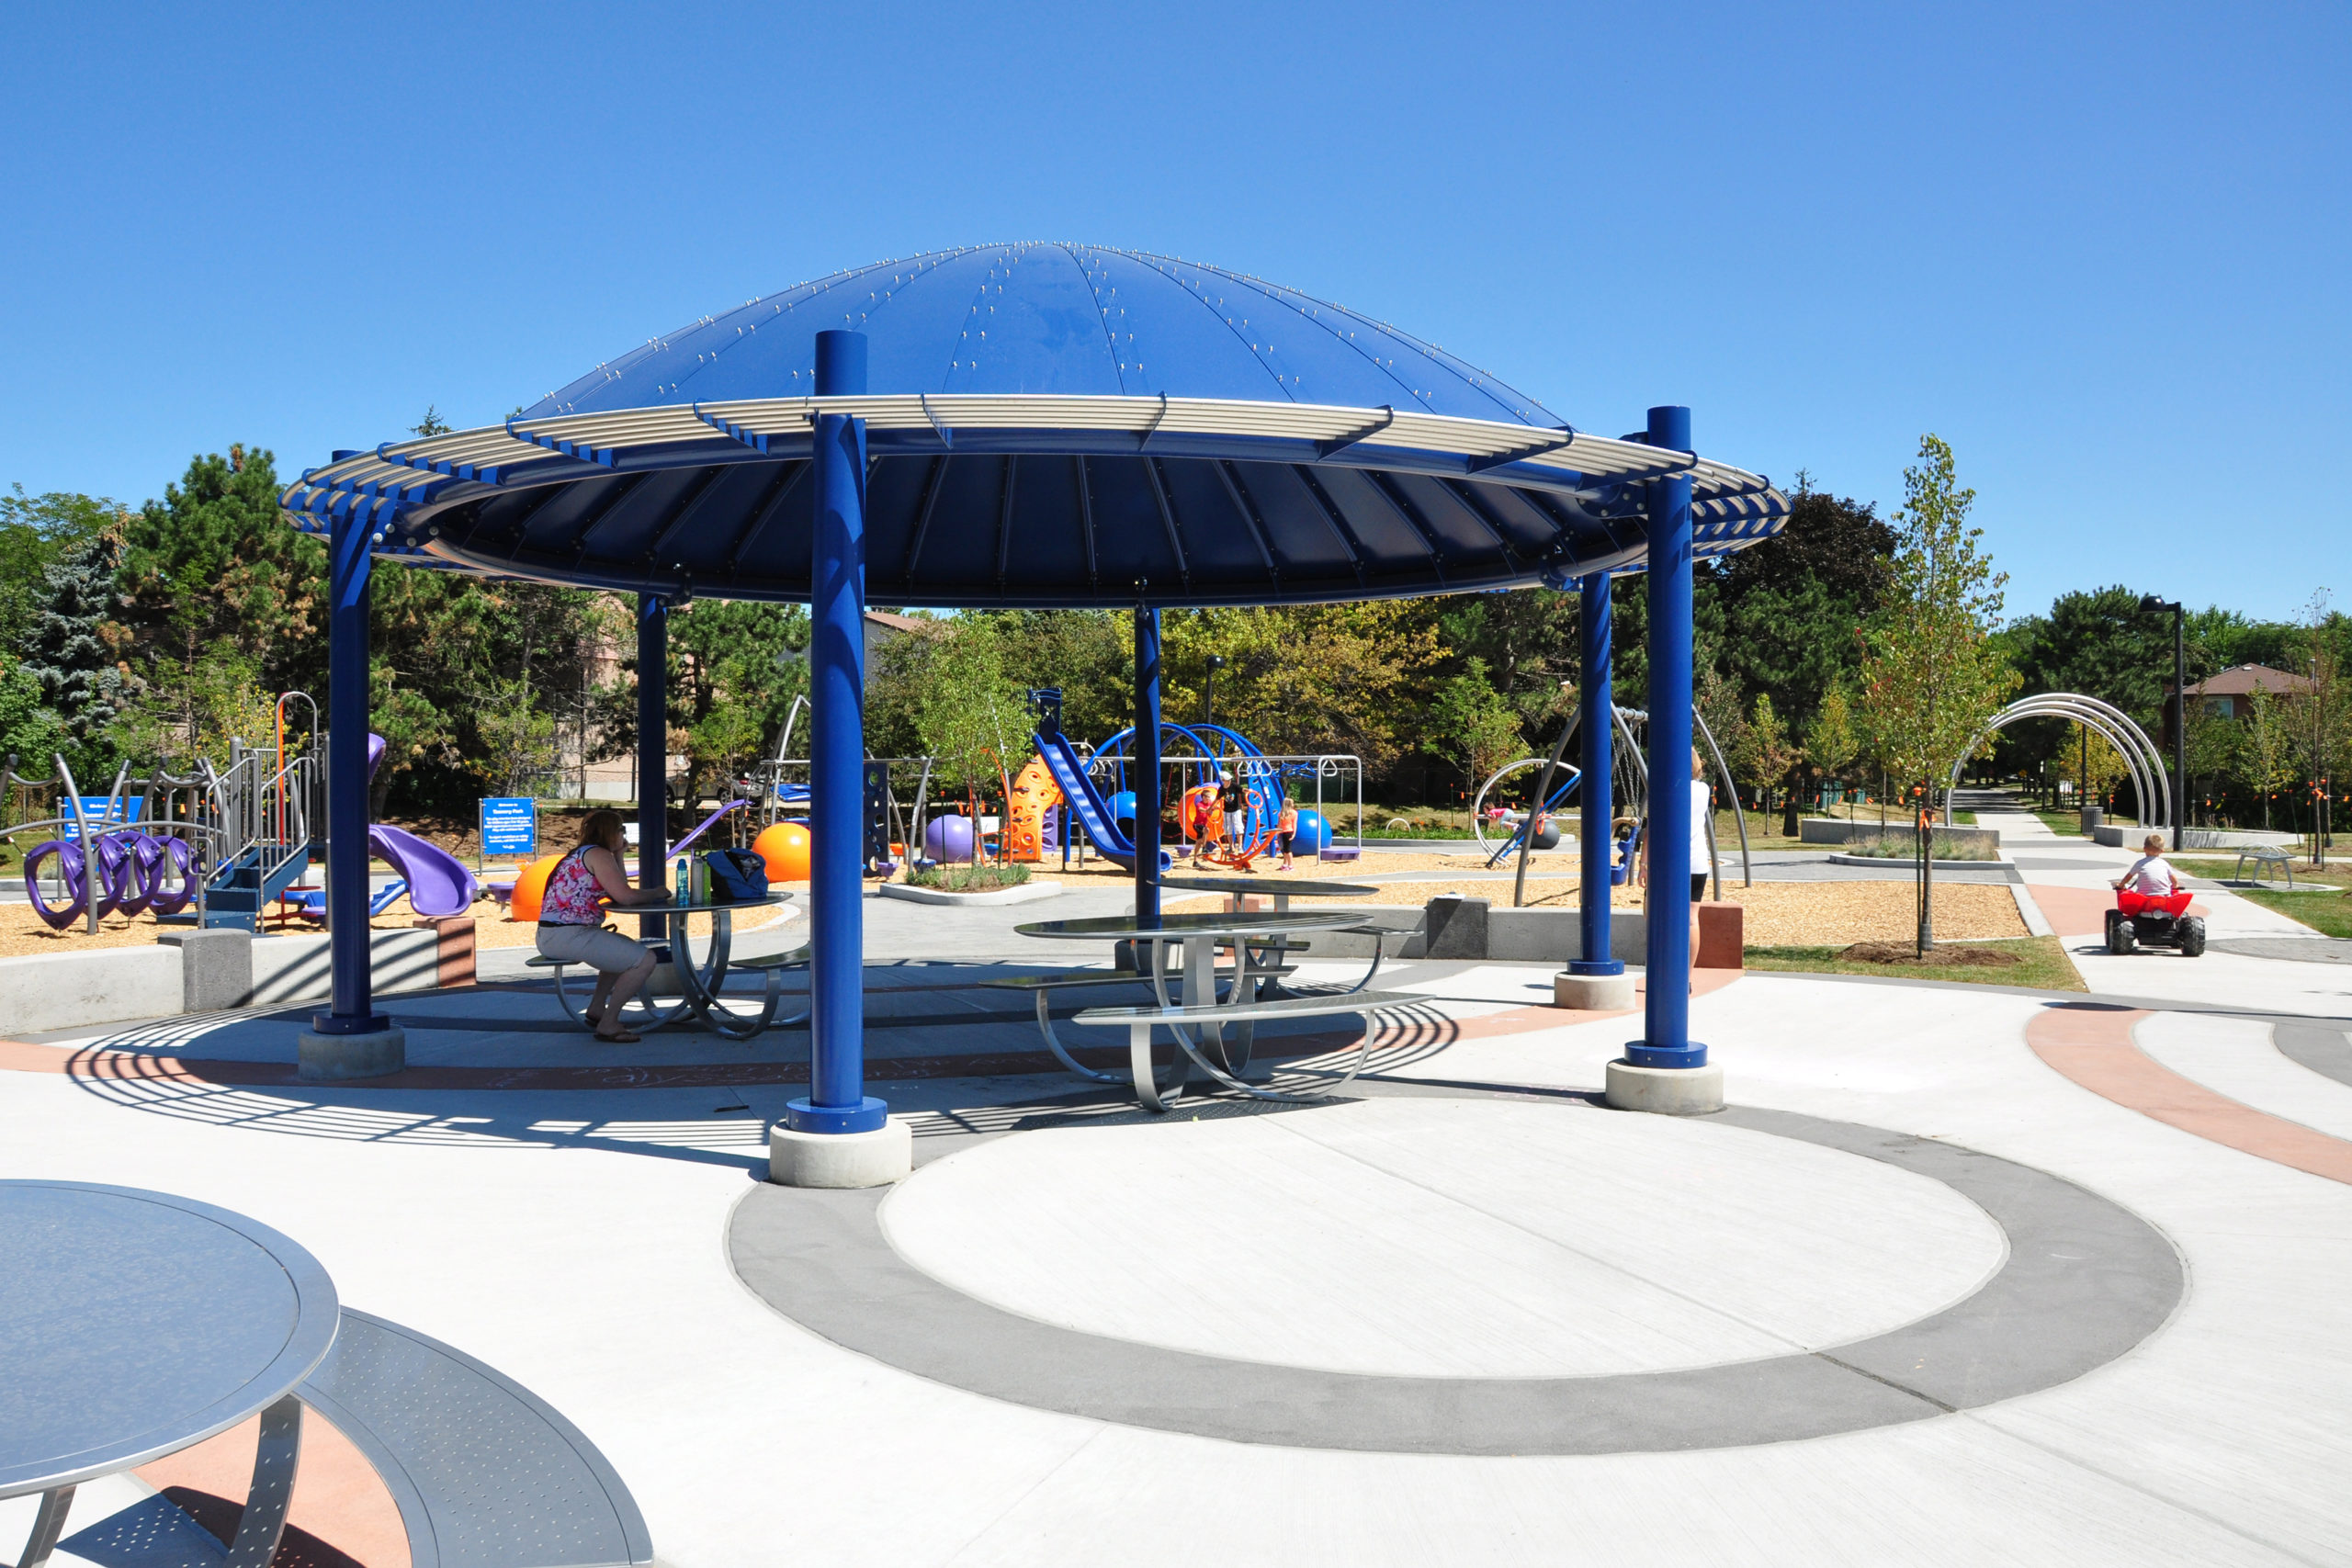 Shade structure with childrens playground.